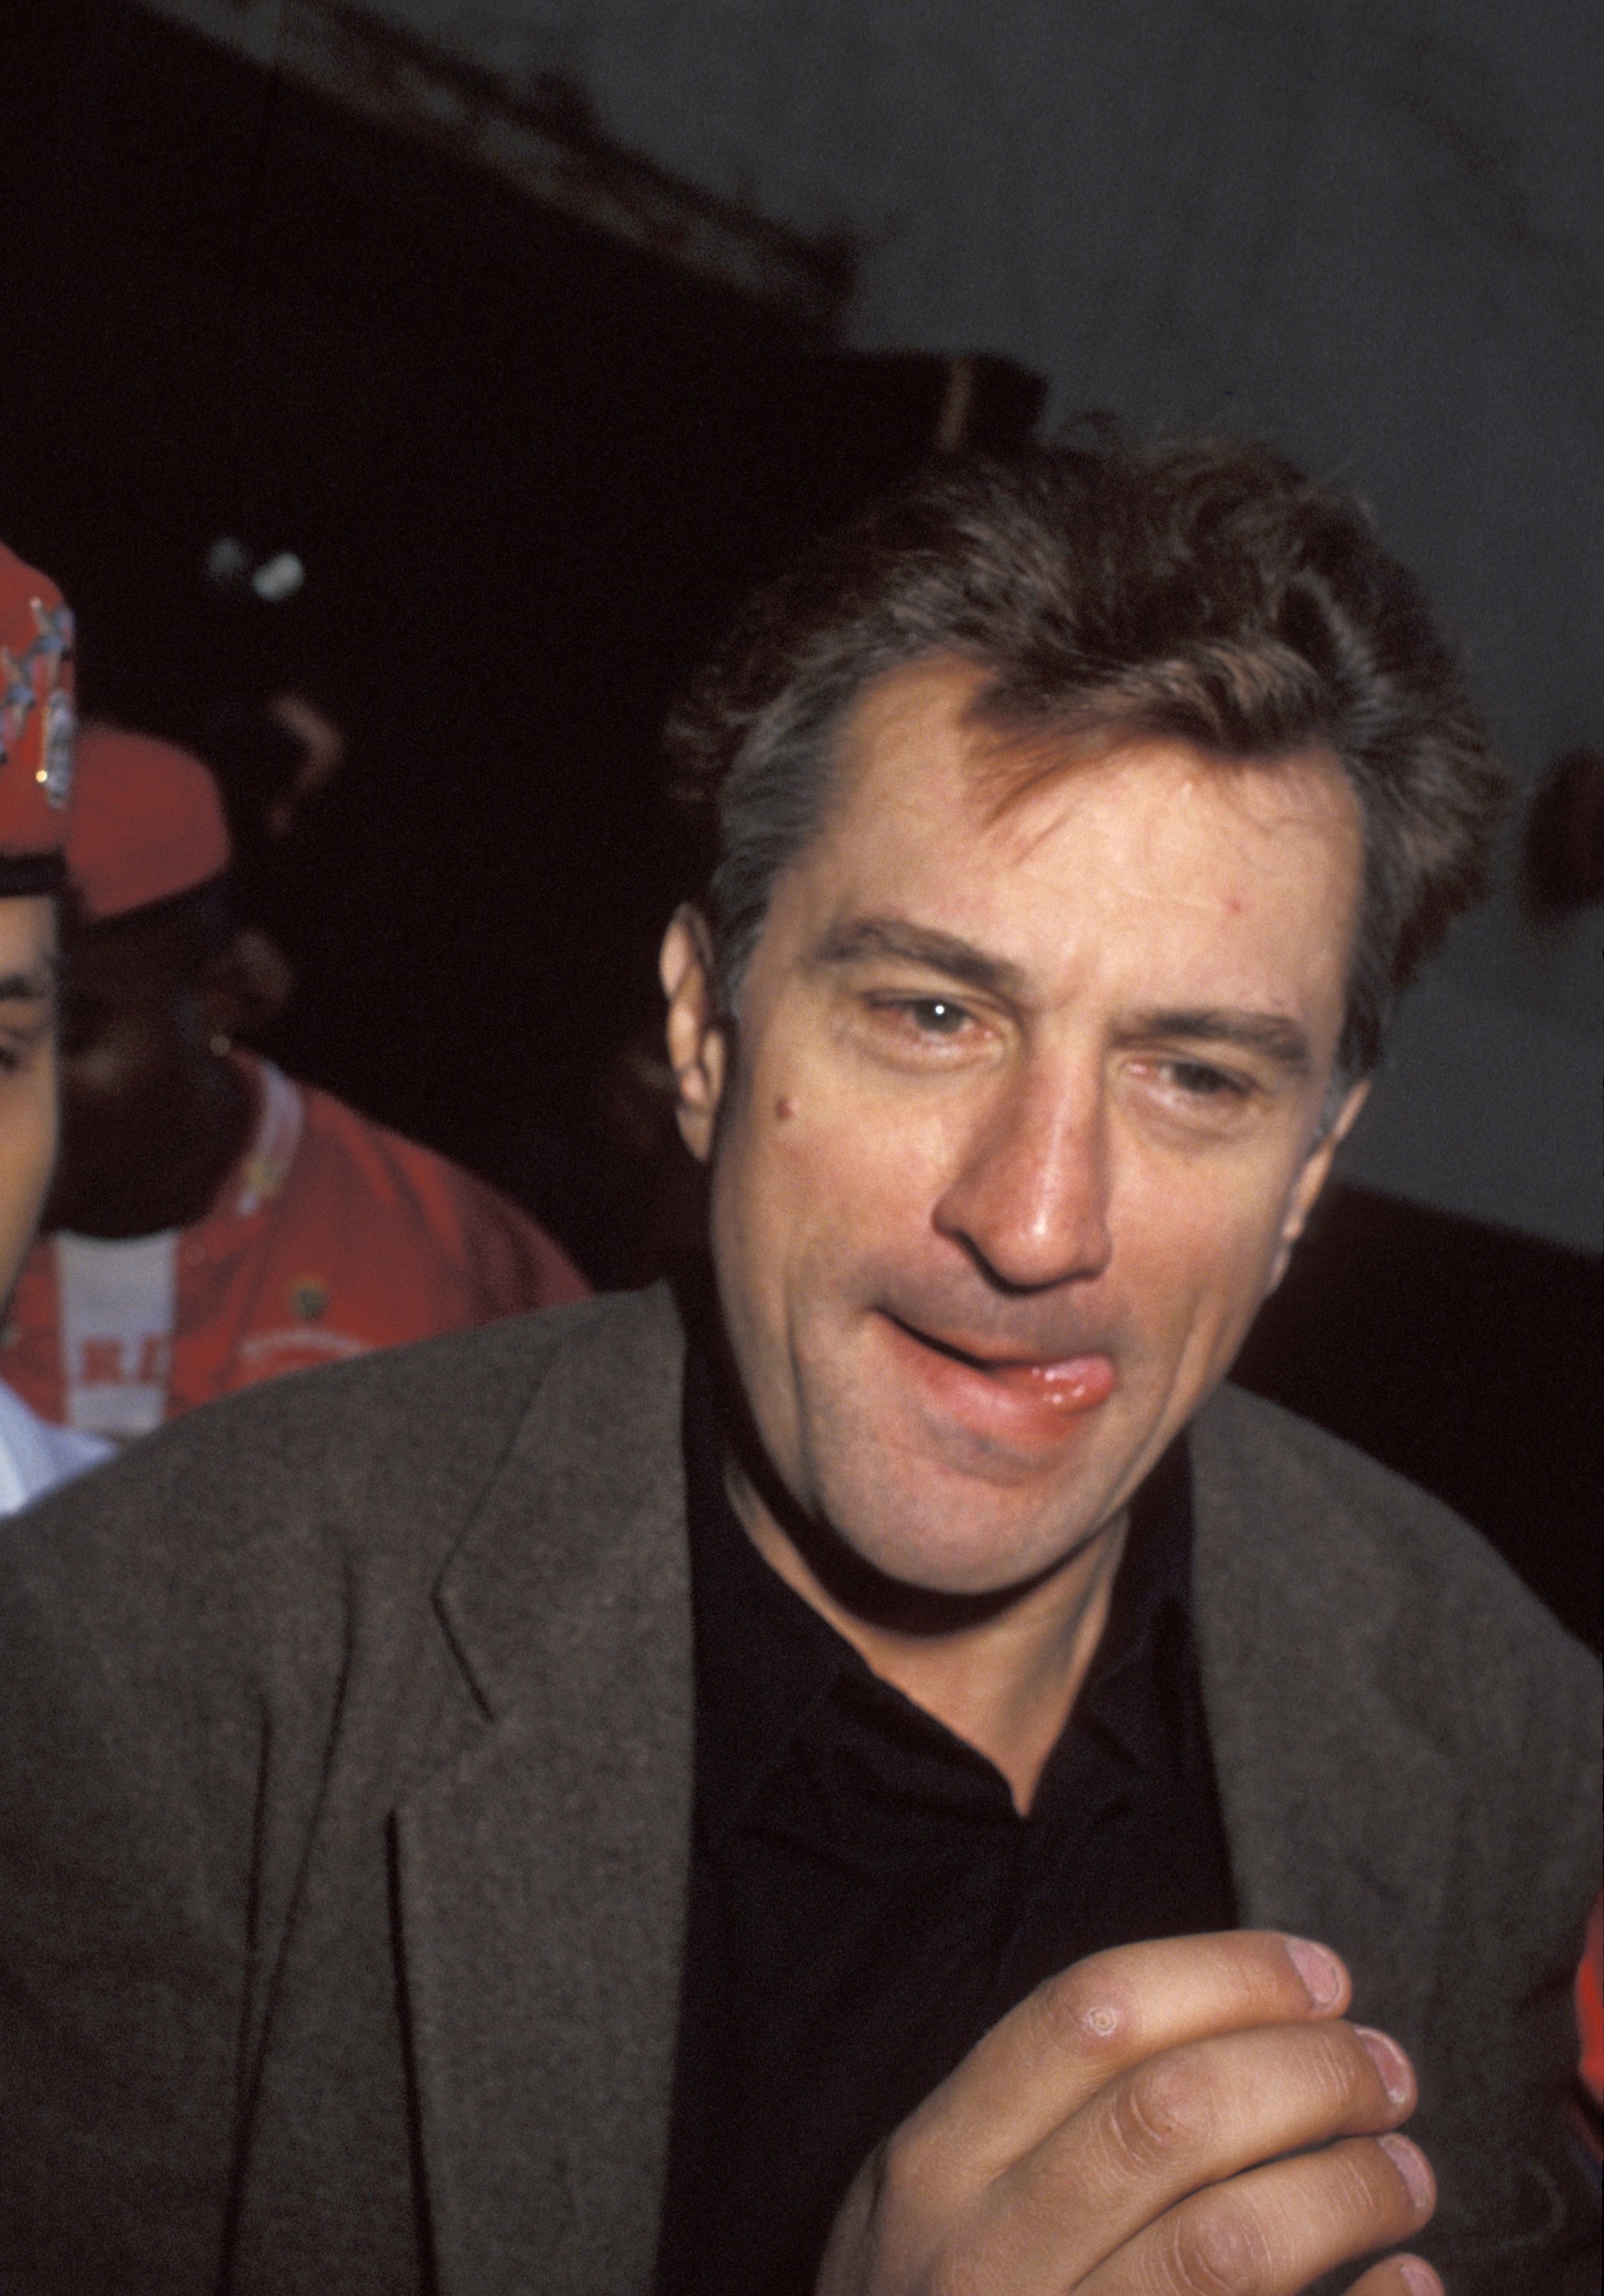 Robert de Niro at the Smith Family Foundation's 4th Annual Willi Day Fashion Benefit in New York City on November 8, 1992 | Source: Getty Images